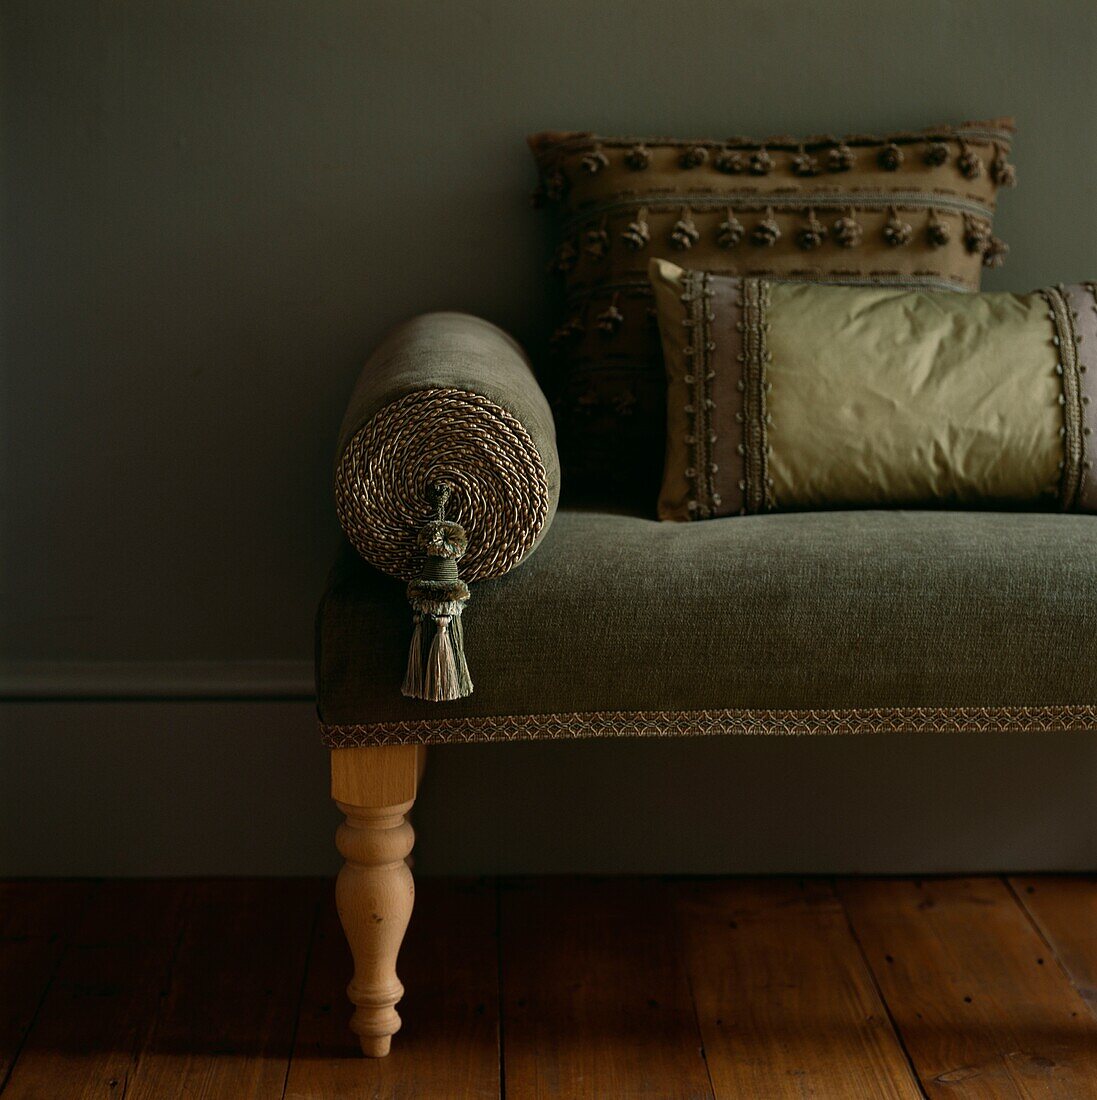 Green upholstered seat with decorative cushions